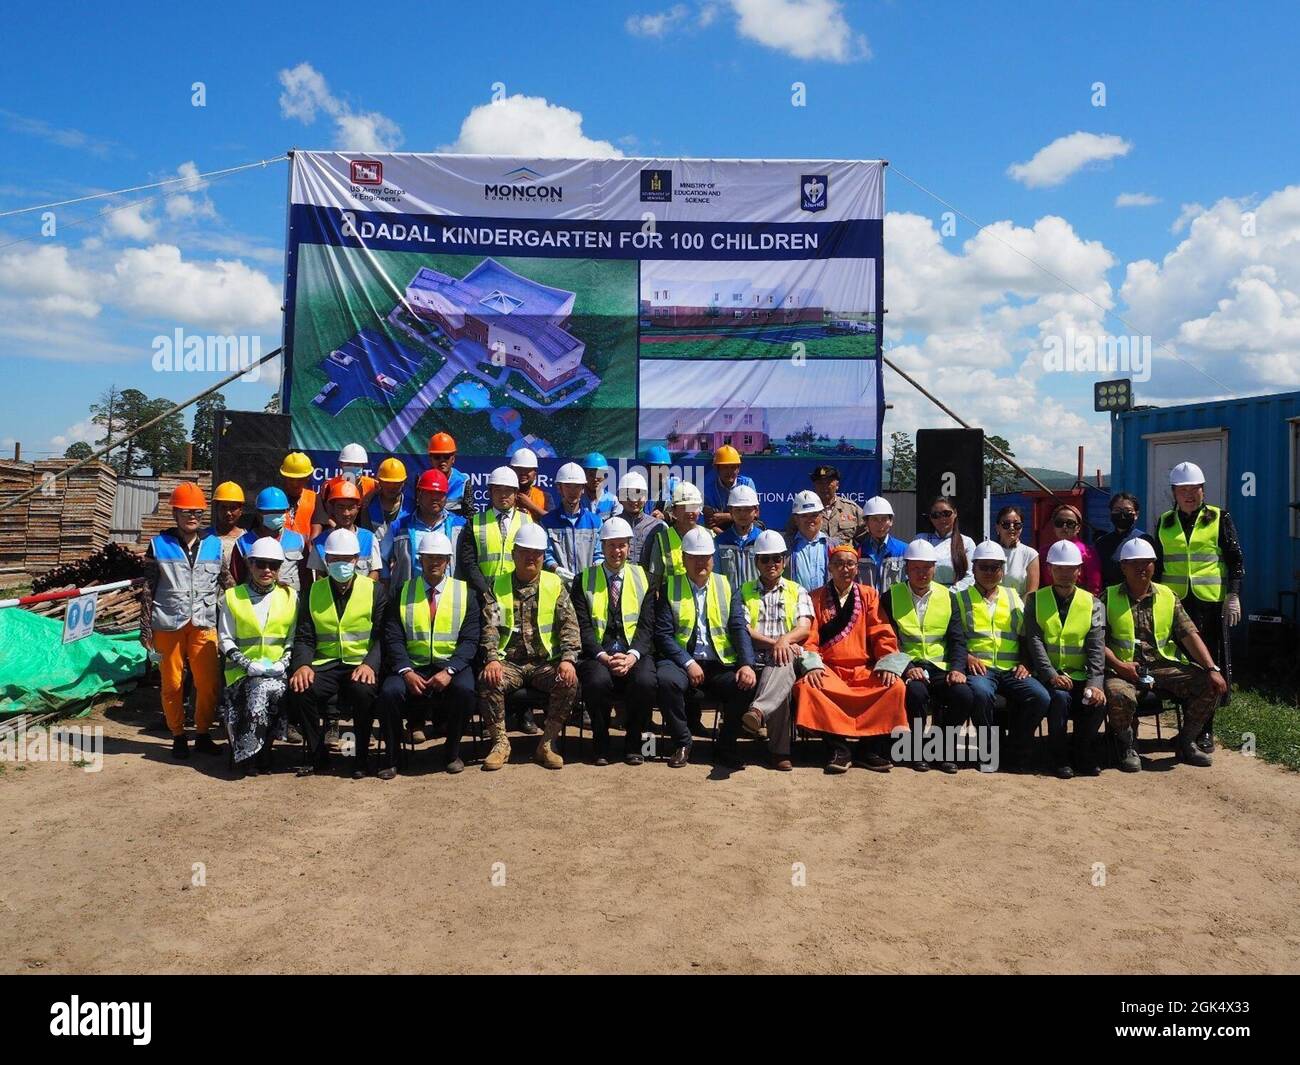 The U.S. Embassy Deputy Chief of Mission and Civil Military Support Element conduct a kindergarten groundbreaking ceremony in Dadal Soum, Khentii Province on 29JUL21. Stock Photo